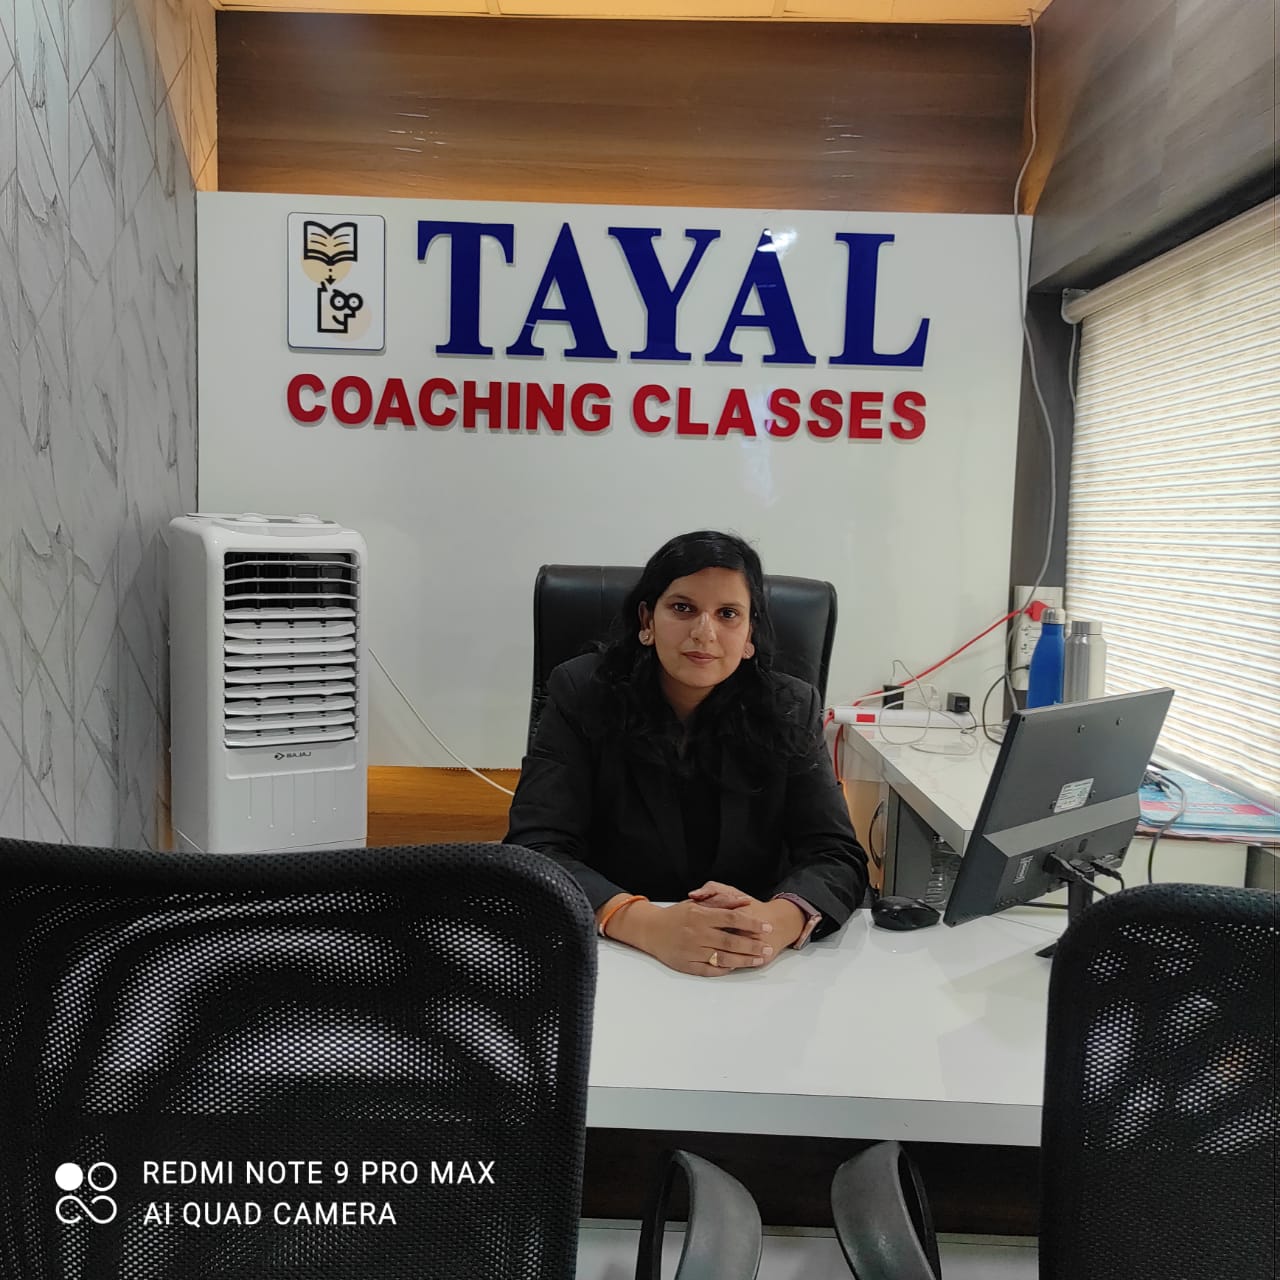 About Tayal Coaching Classes